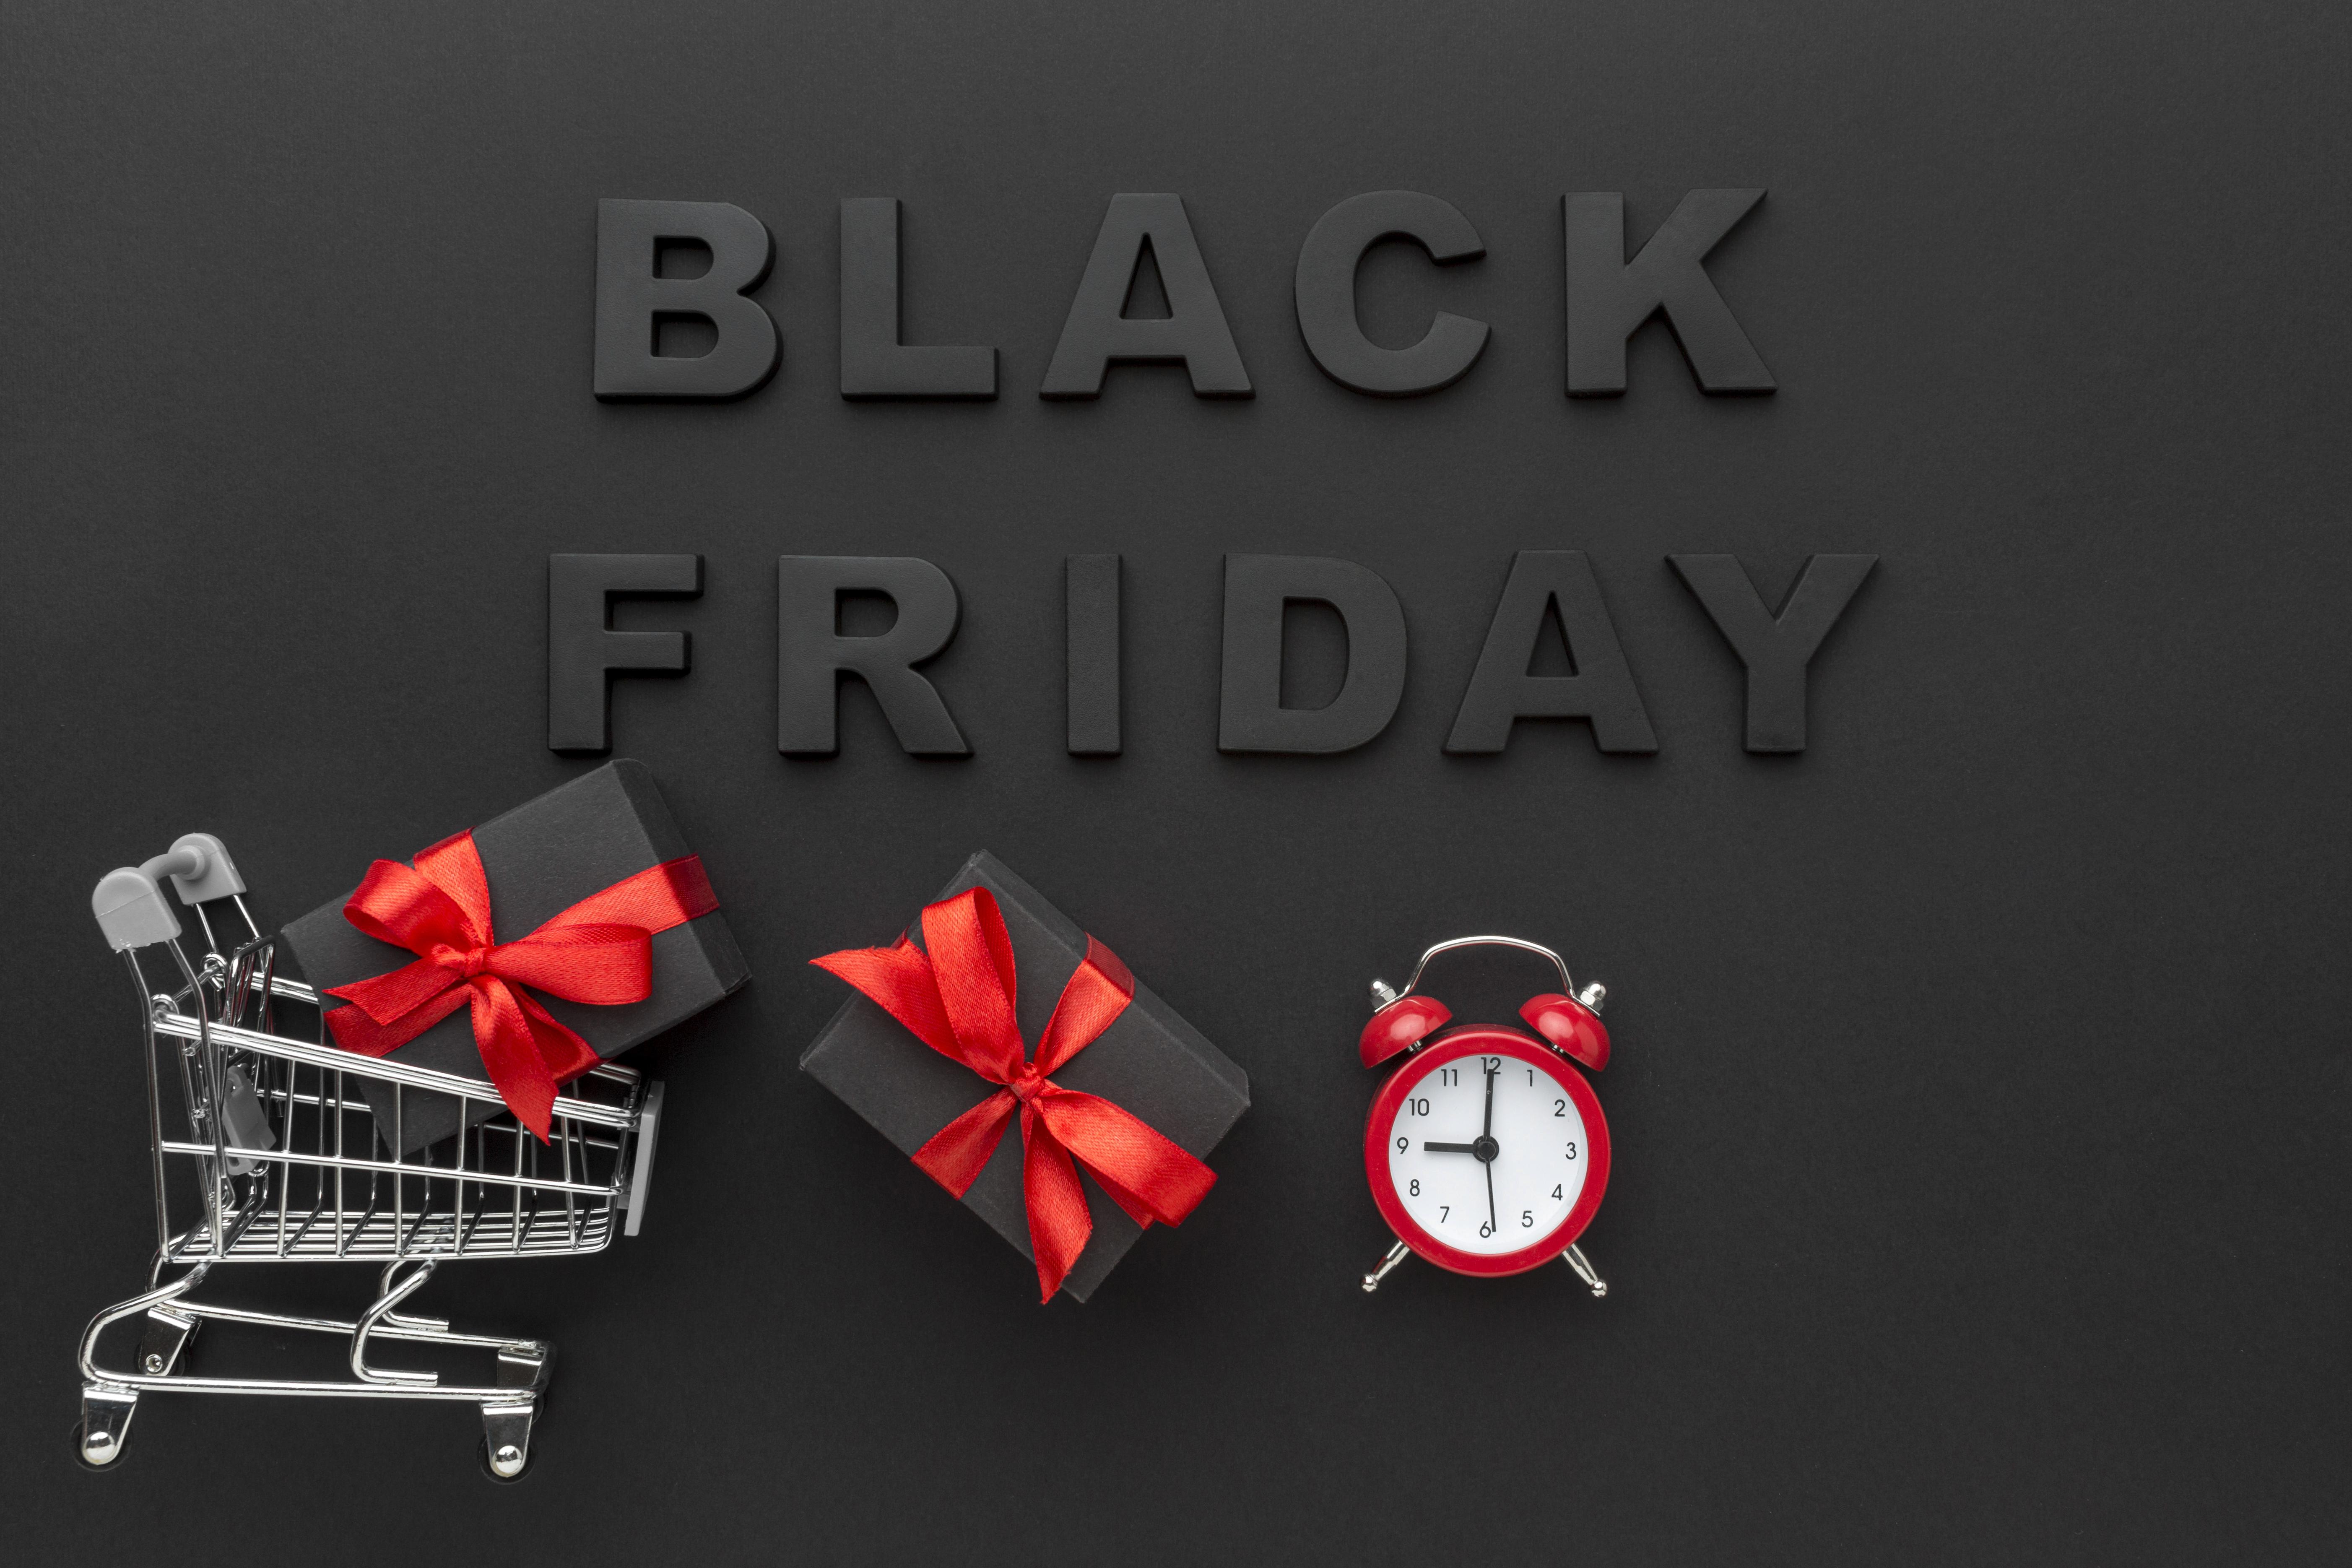 Black Friday Shopping Tips: How to Score the Best Deals